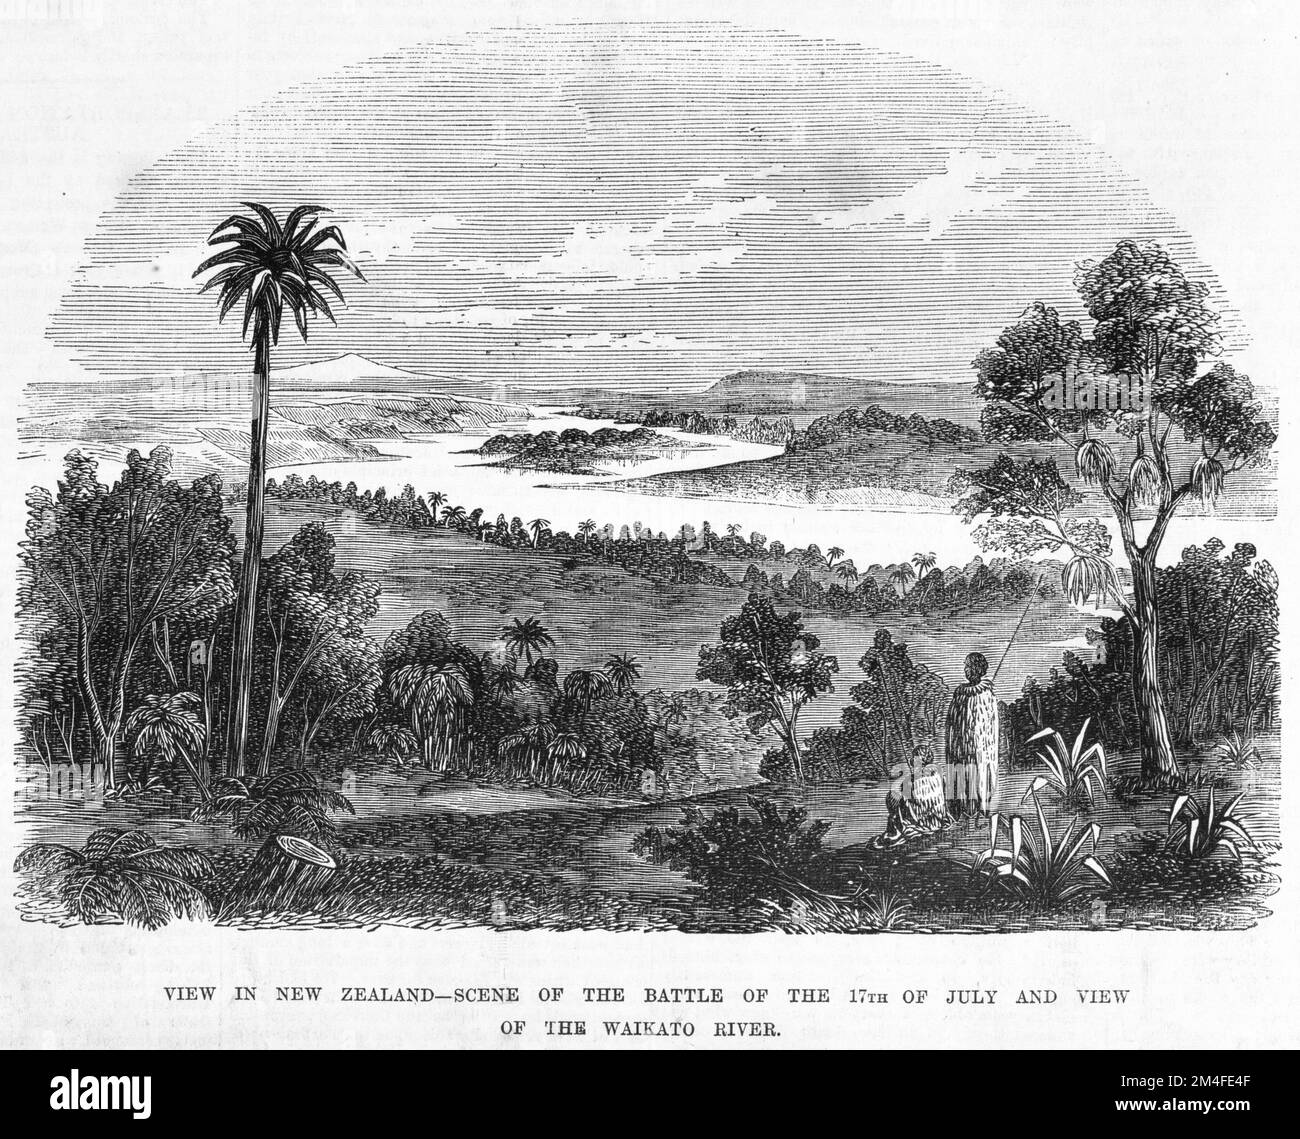 View In New Zealand - Scene Of The Battle Of The 17th Of July And View Of The Waikato River. 1863. Stock Photo